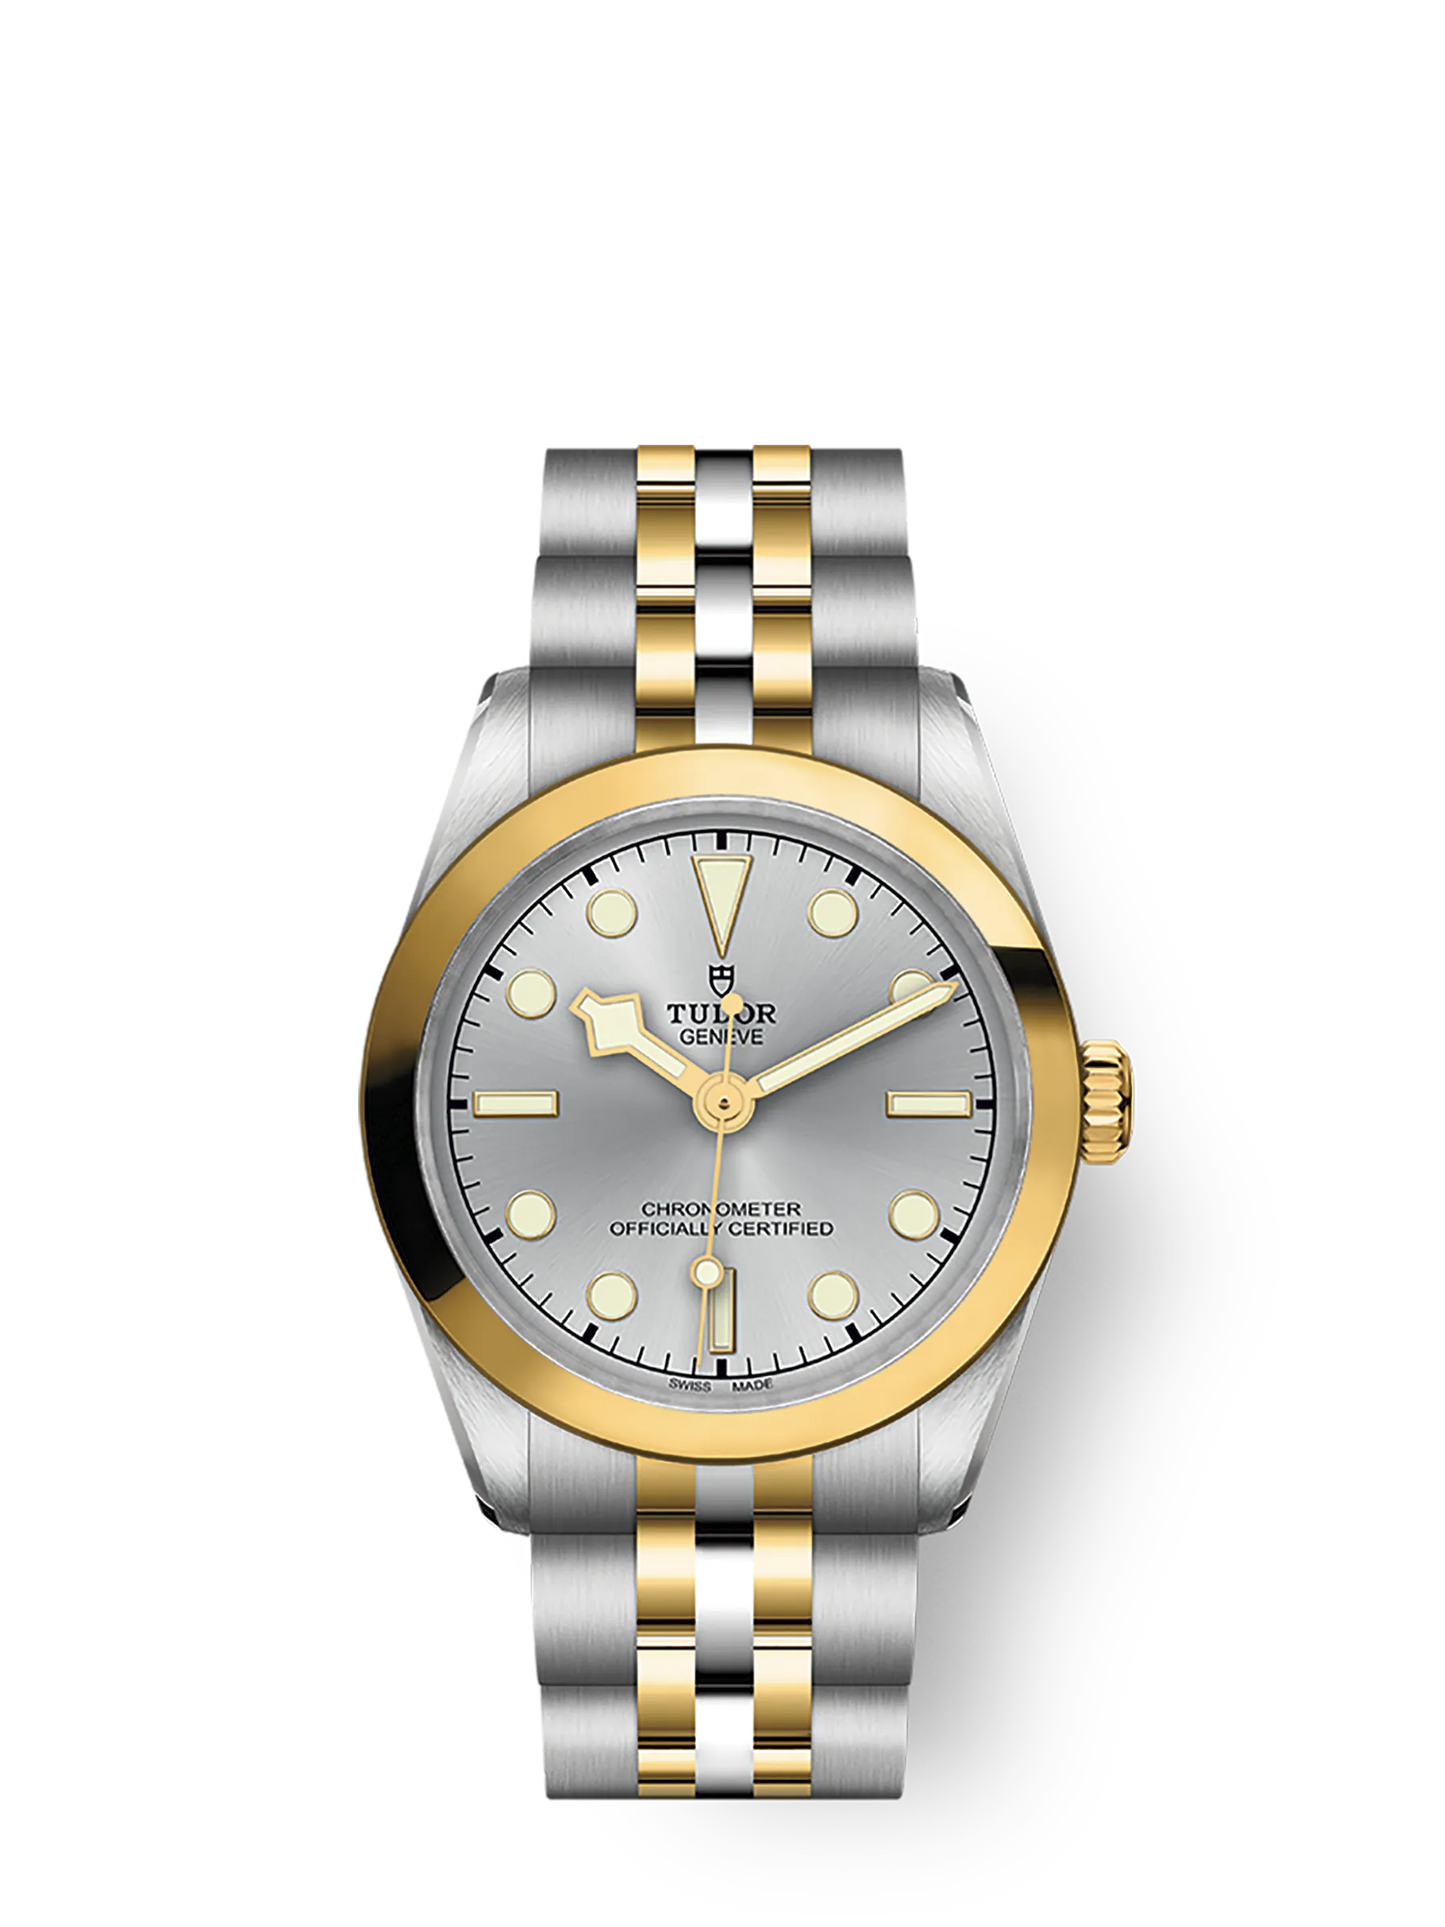 Tudor Black Bay 39 S&G, Stainless Steel and 18k Yellow Gold, Ref# M79663-0002